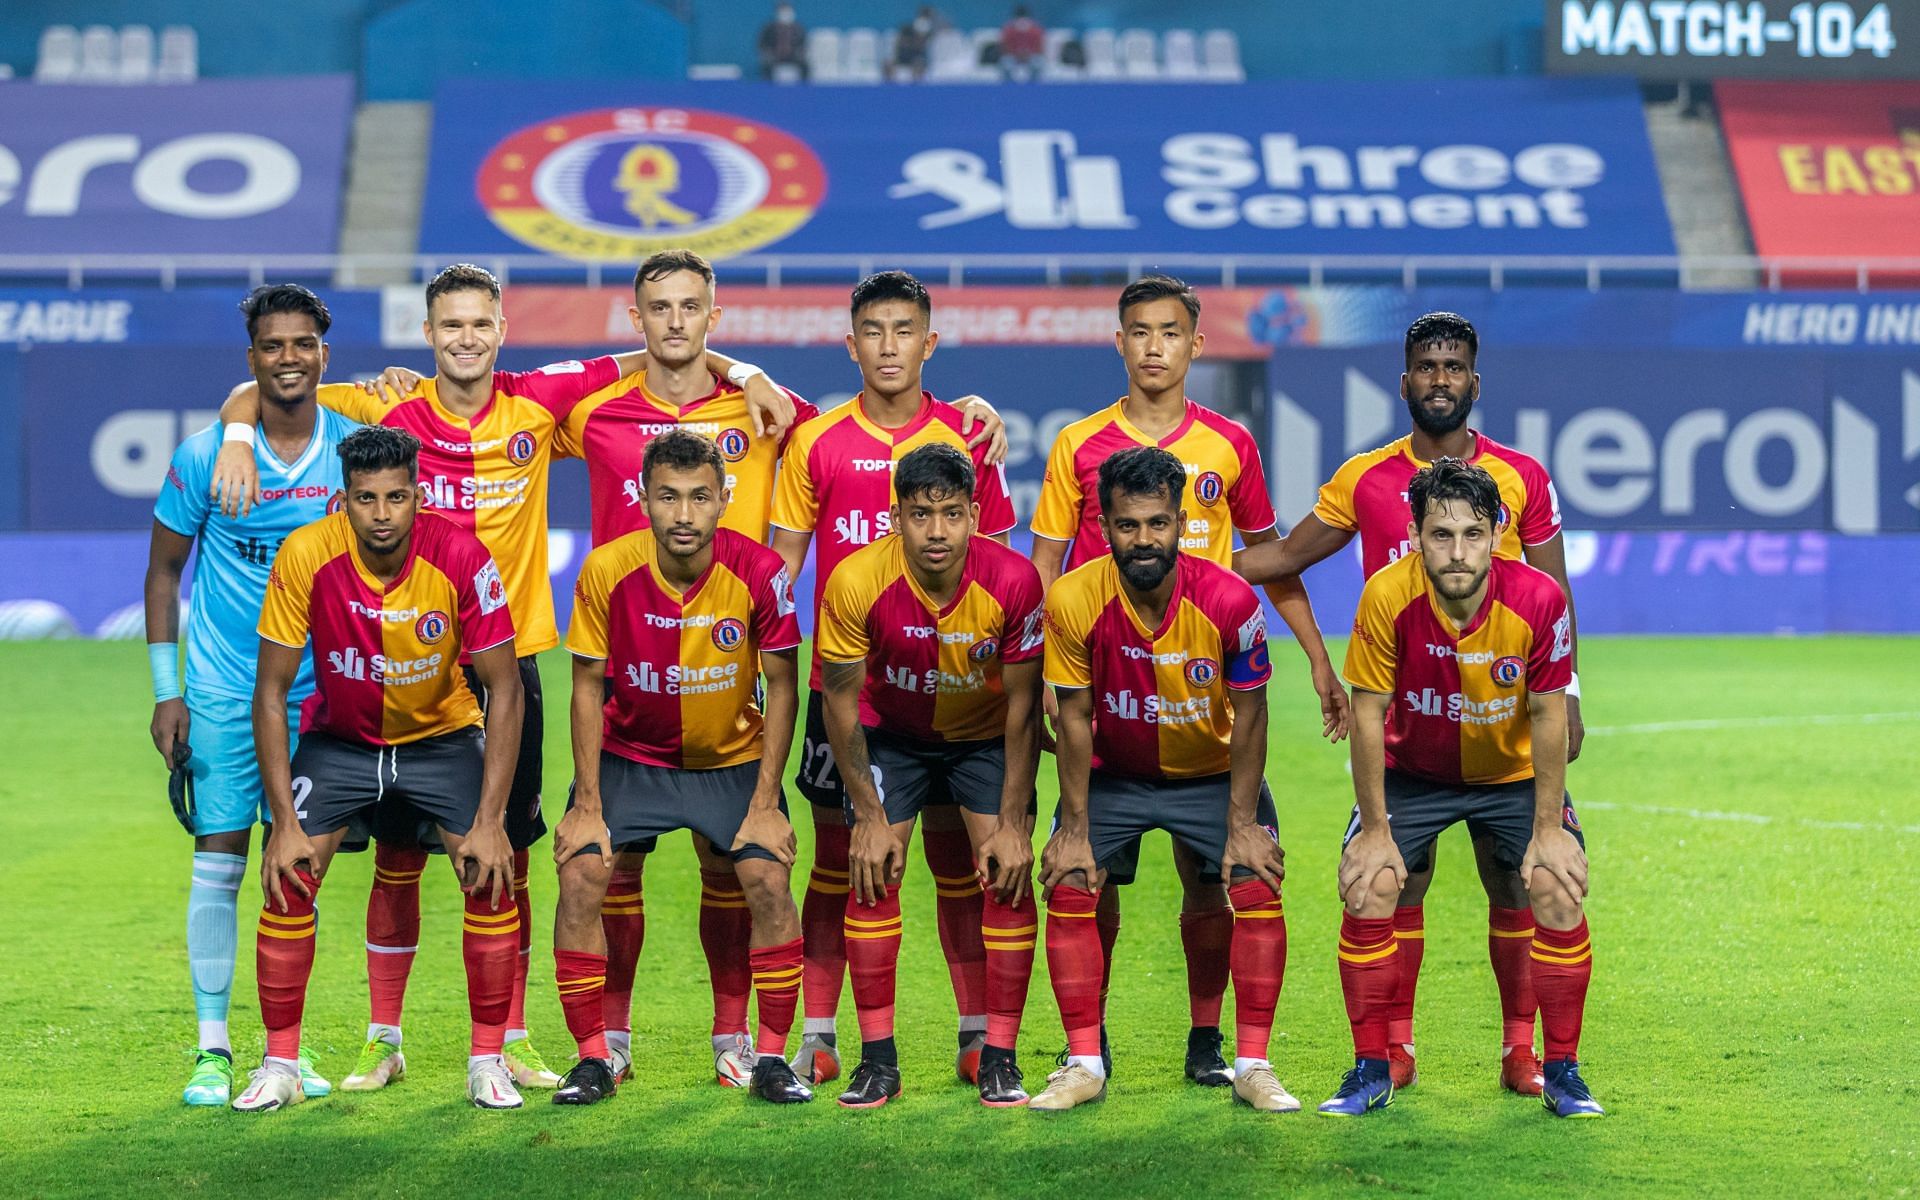 East Bengal players during their match in the Indian Super League 2021-22 season. (Image Courtesy: Twitter/sc_eastbengal)